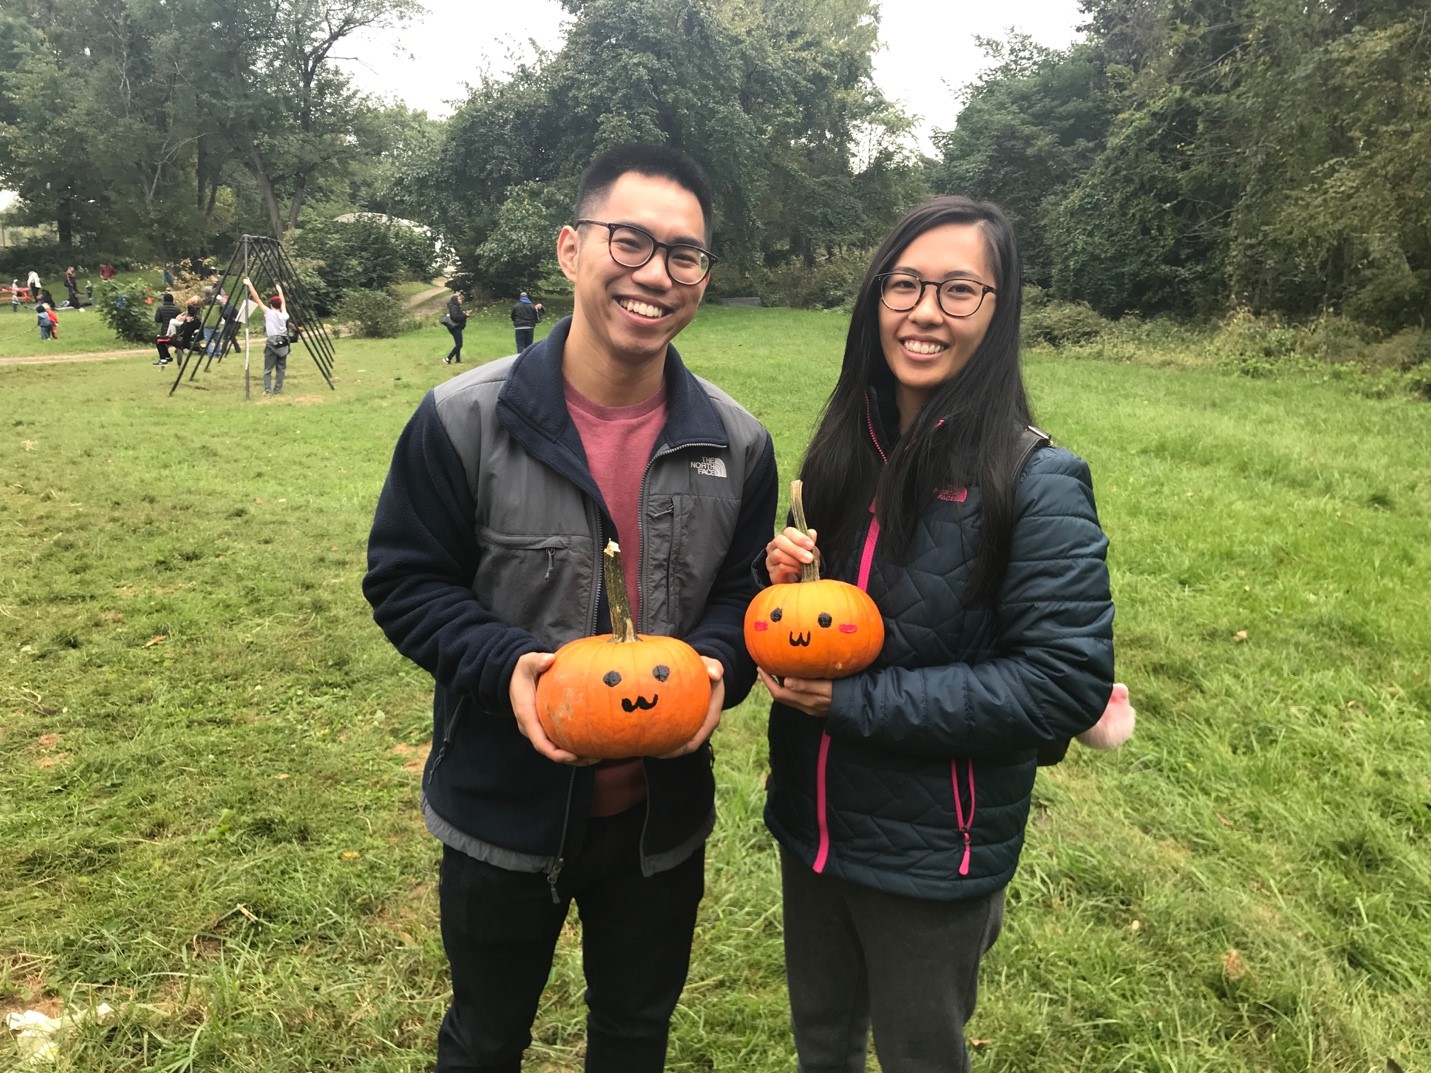 A pumpkin picking and painting trip to Bartram's Garden